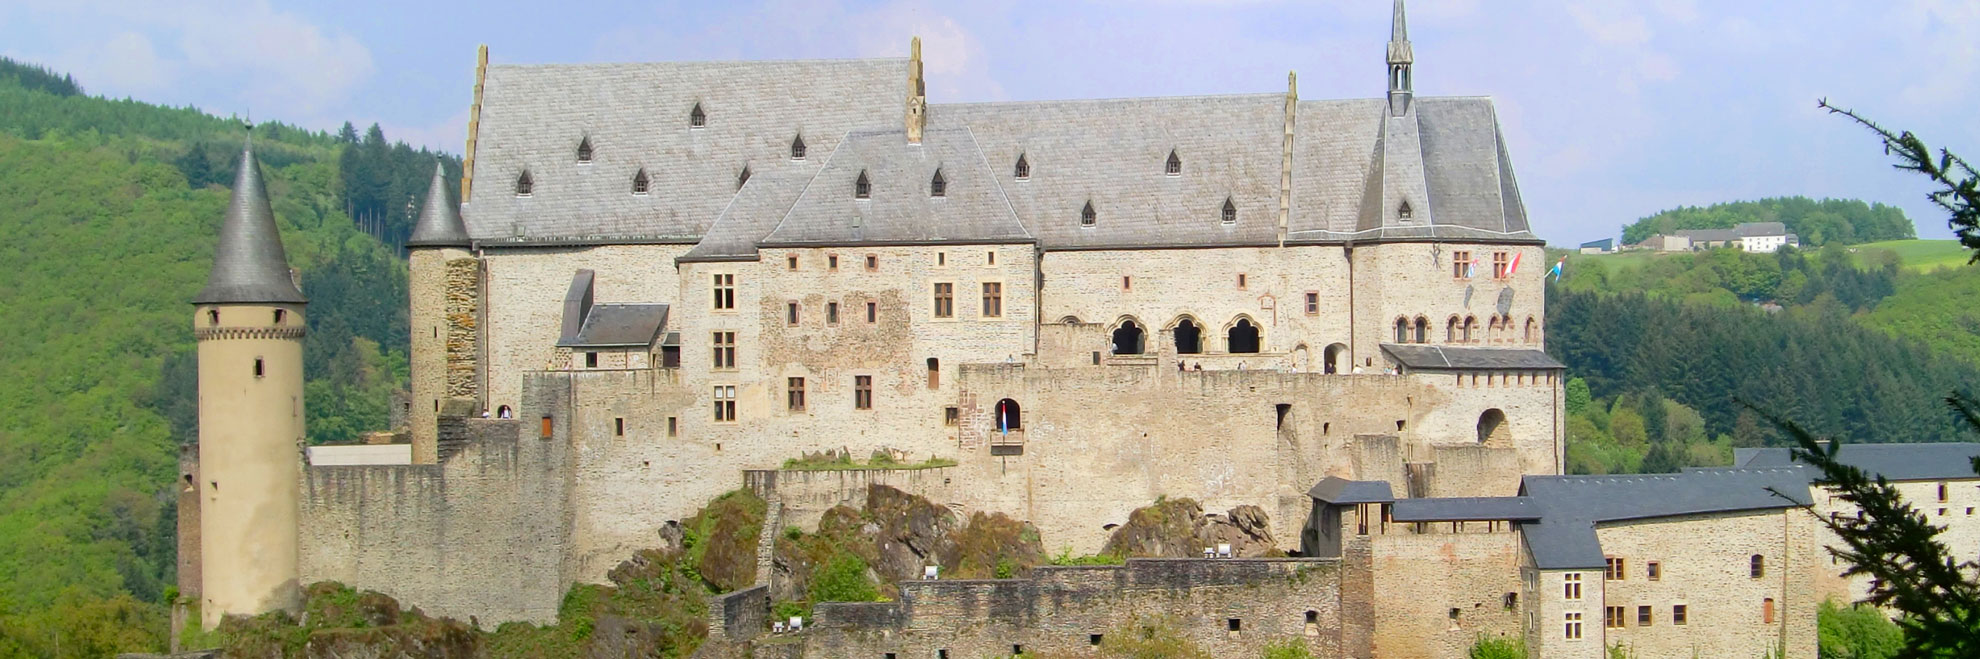 Castle in luxembourg